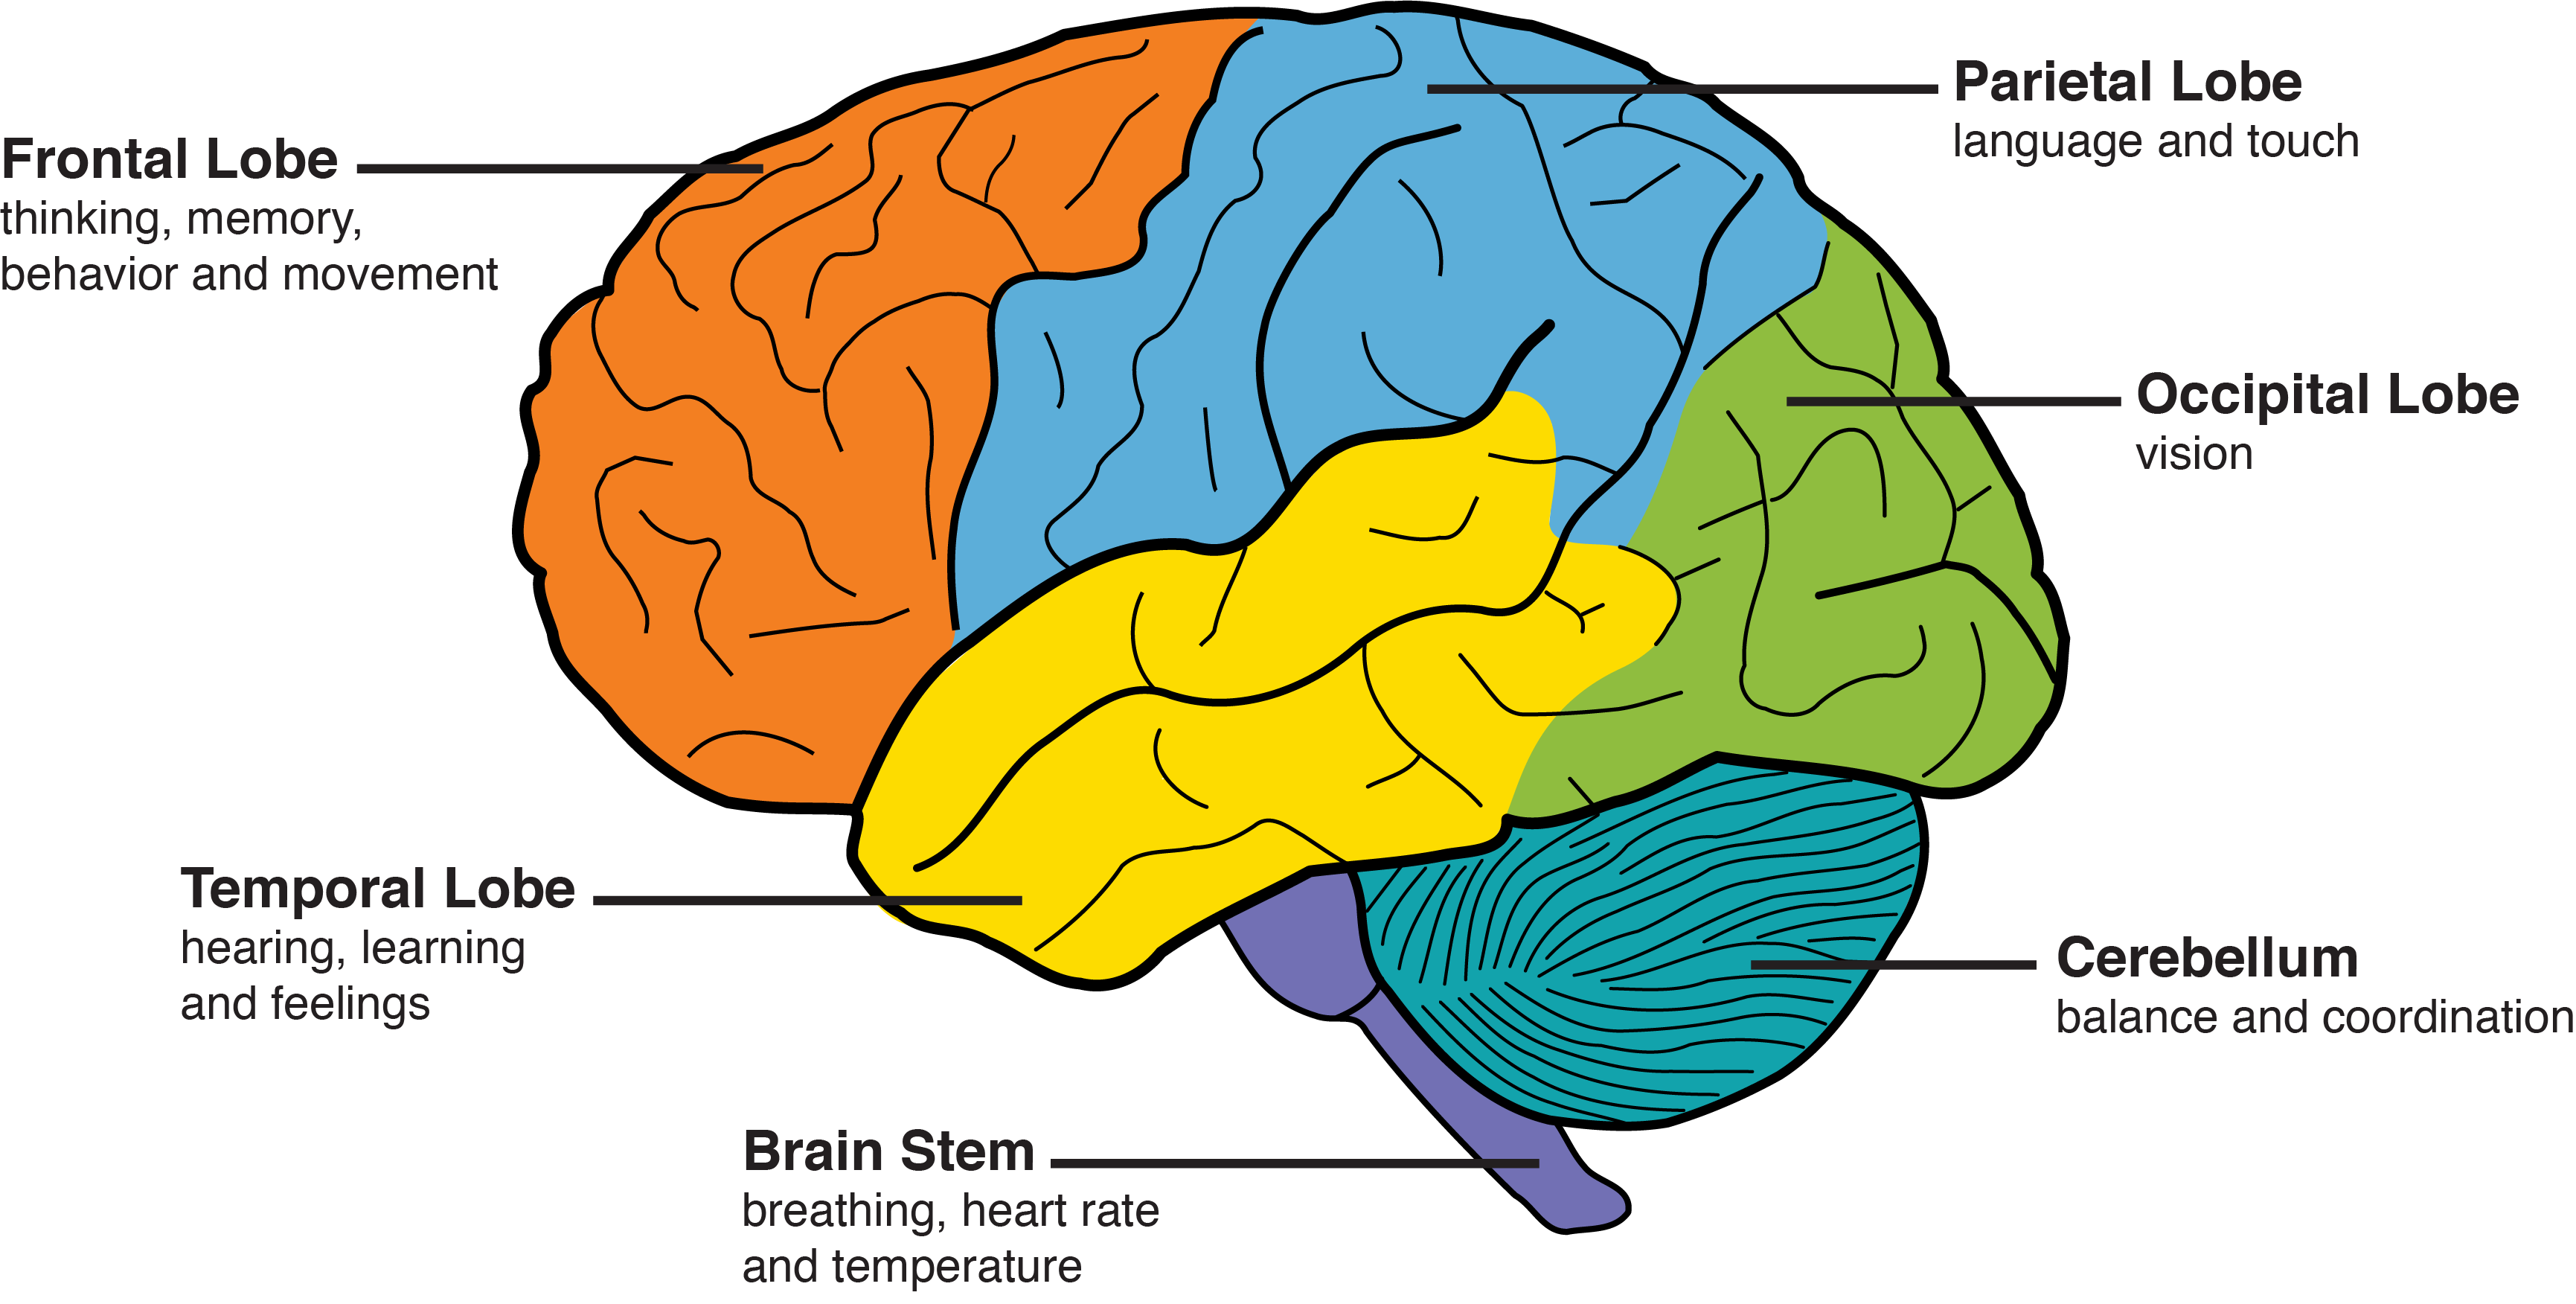 illustration of brain lobes with functional areas marked